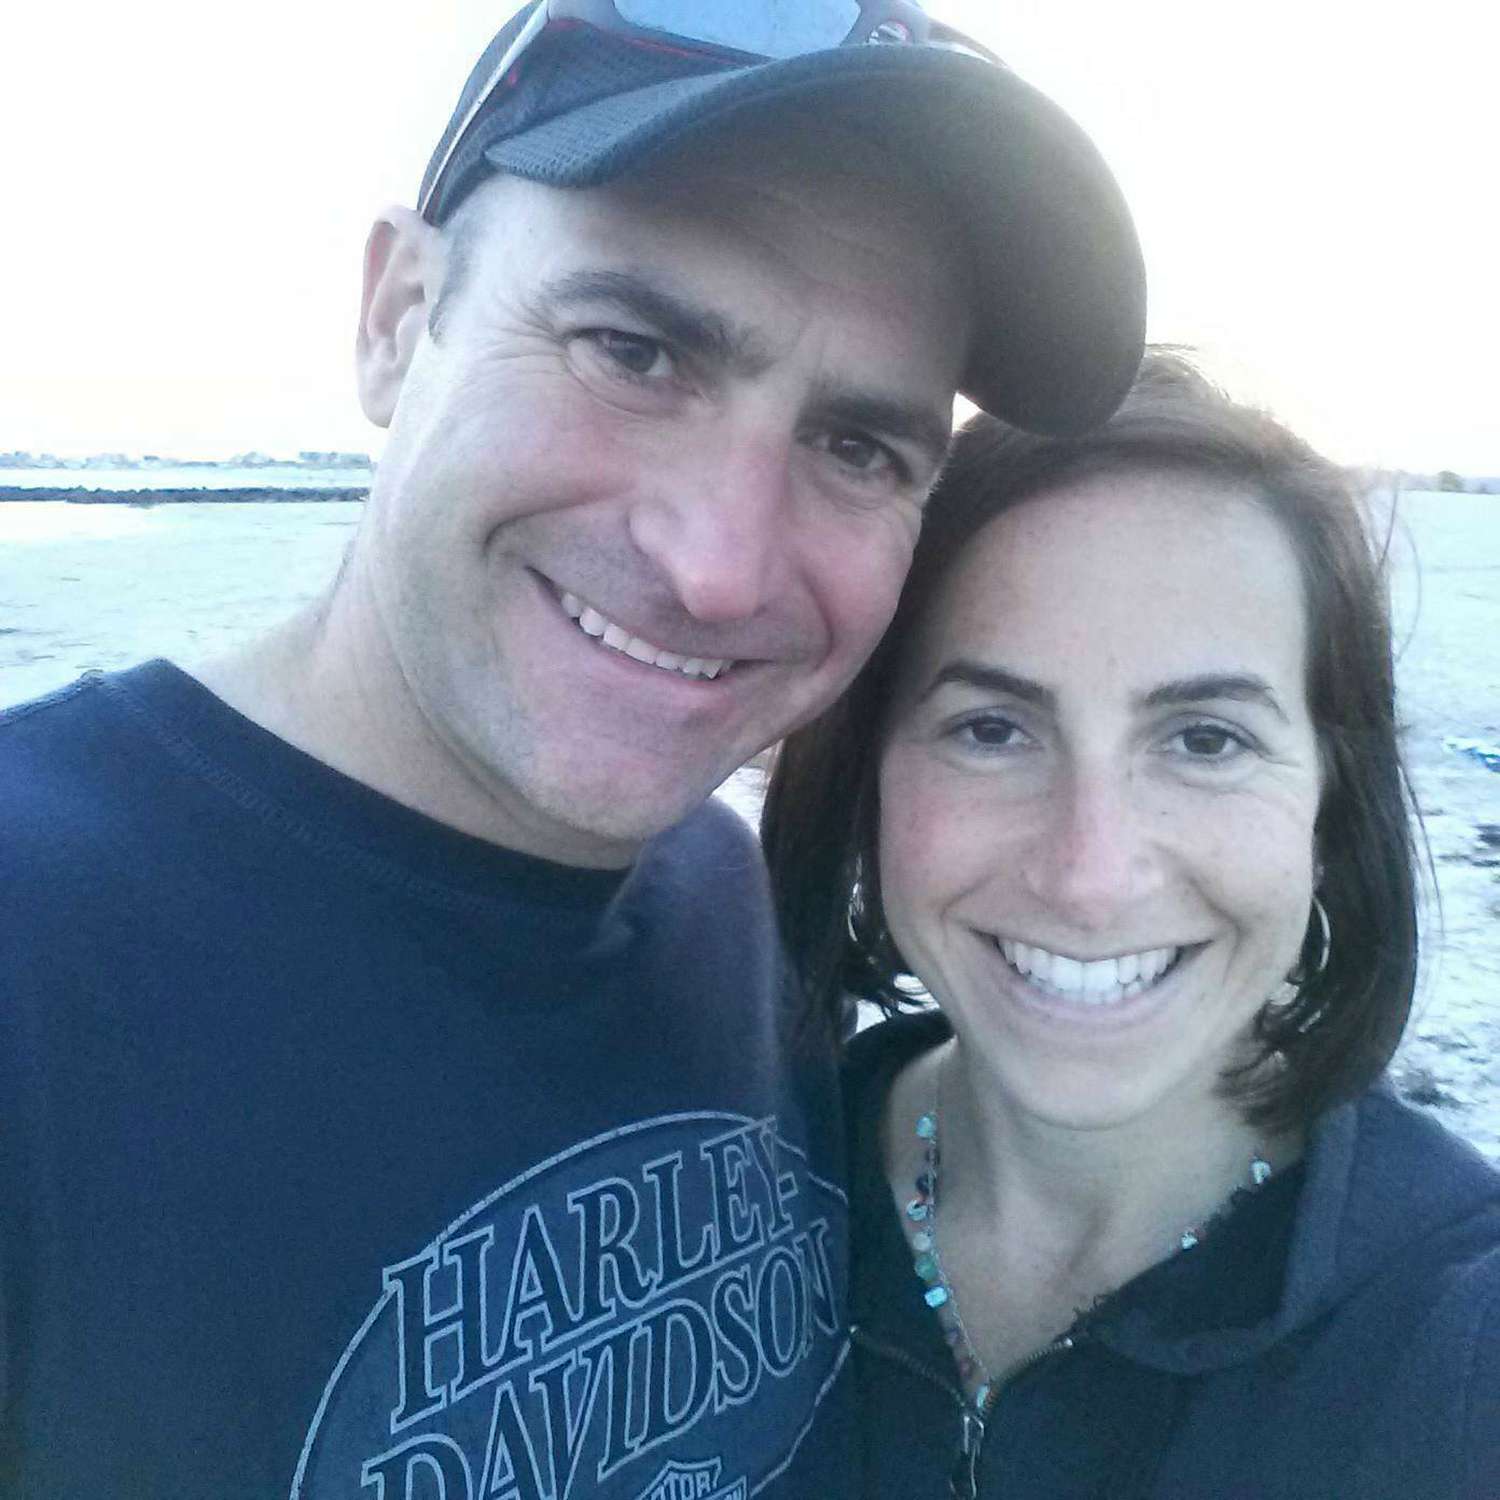 Married Couple Found Shot and Killed in Rhode Island House While Their 3 Kids Were Home